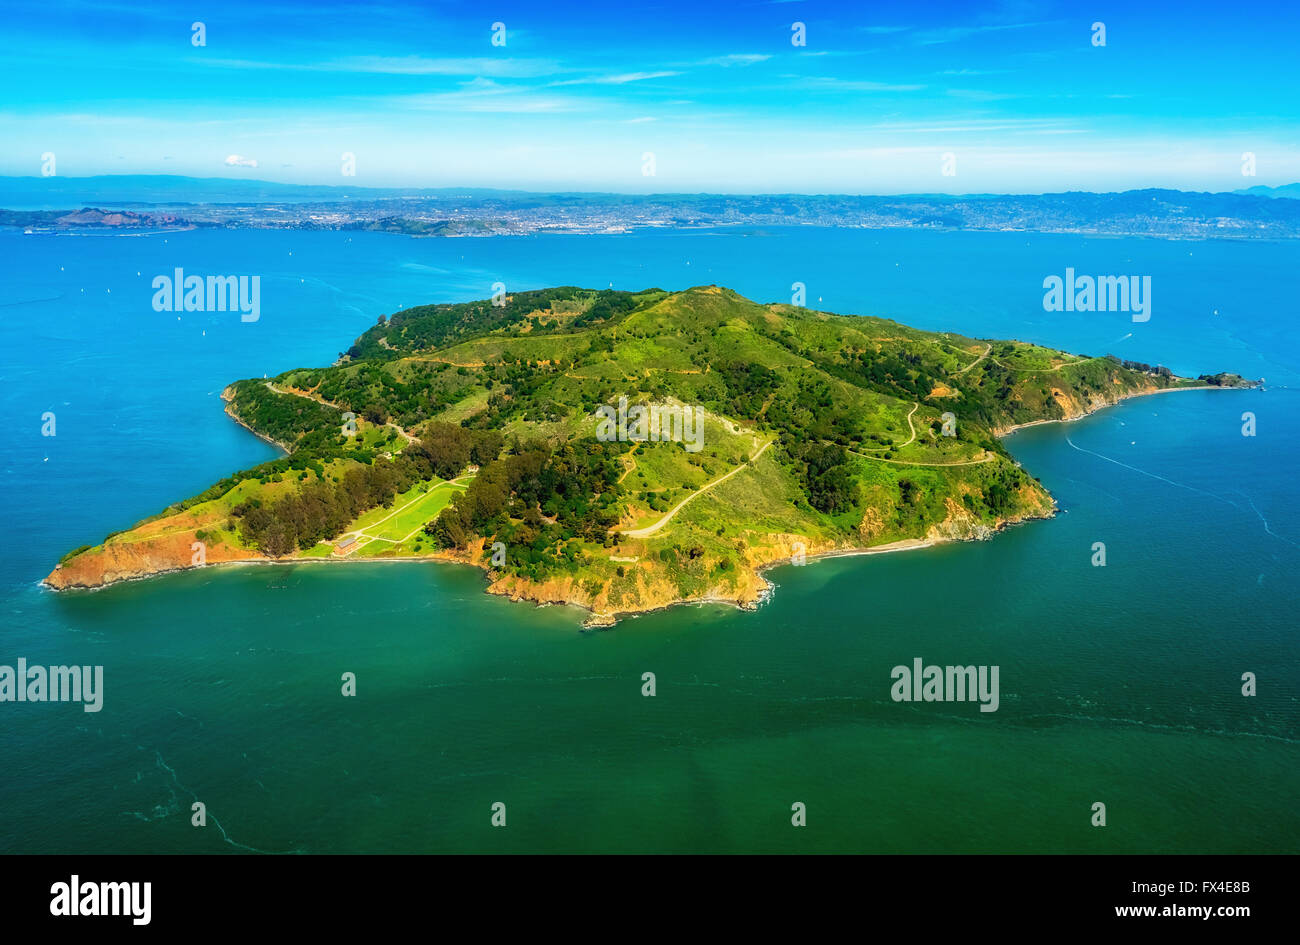 Aerial view, fishing Iceland, Ayala Cove, car-free island in front of Belvedere Tiburon, San Francisco Bay Area, United States Stock Photo